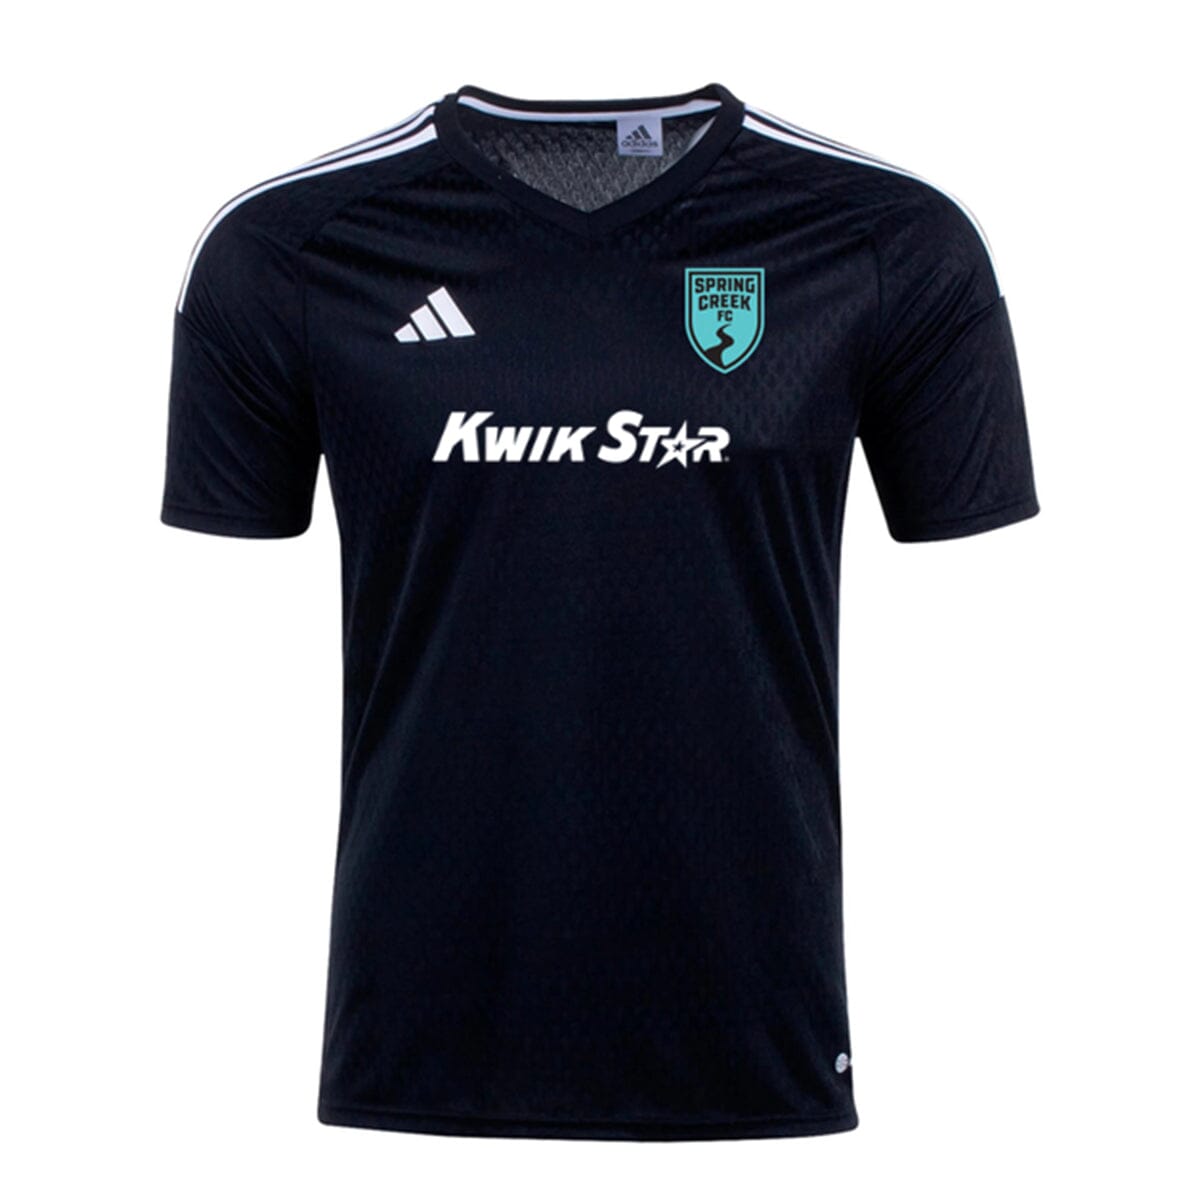 Spring Creek FC '23-'24 Select Competition Match Jersey - Black Jersey Adidas Youth Small (8) Black 